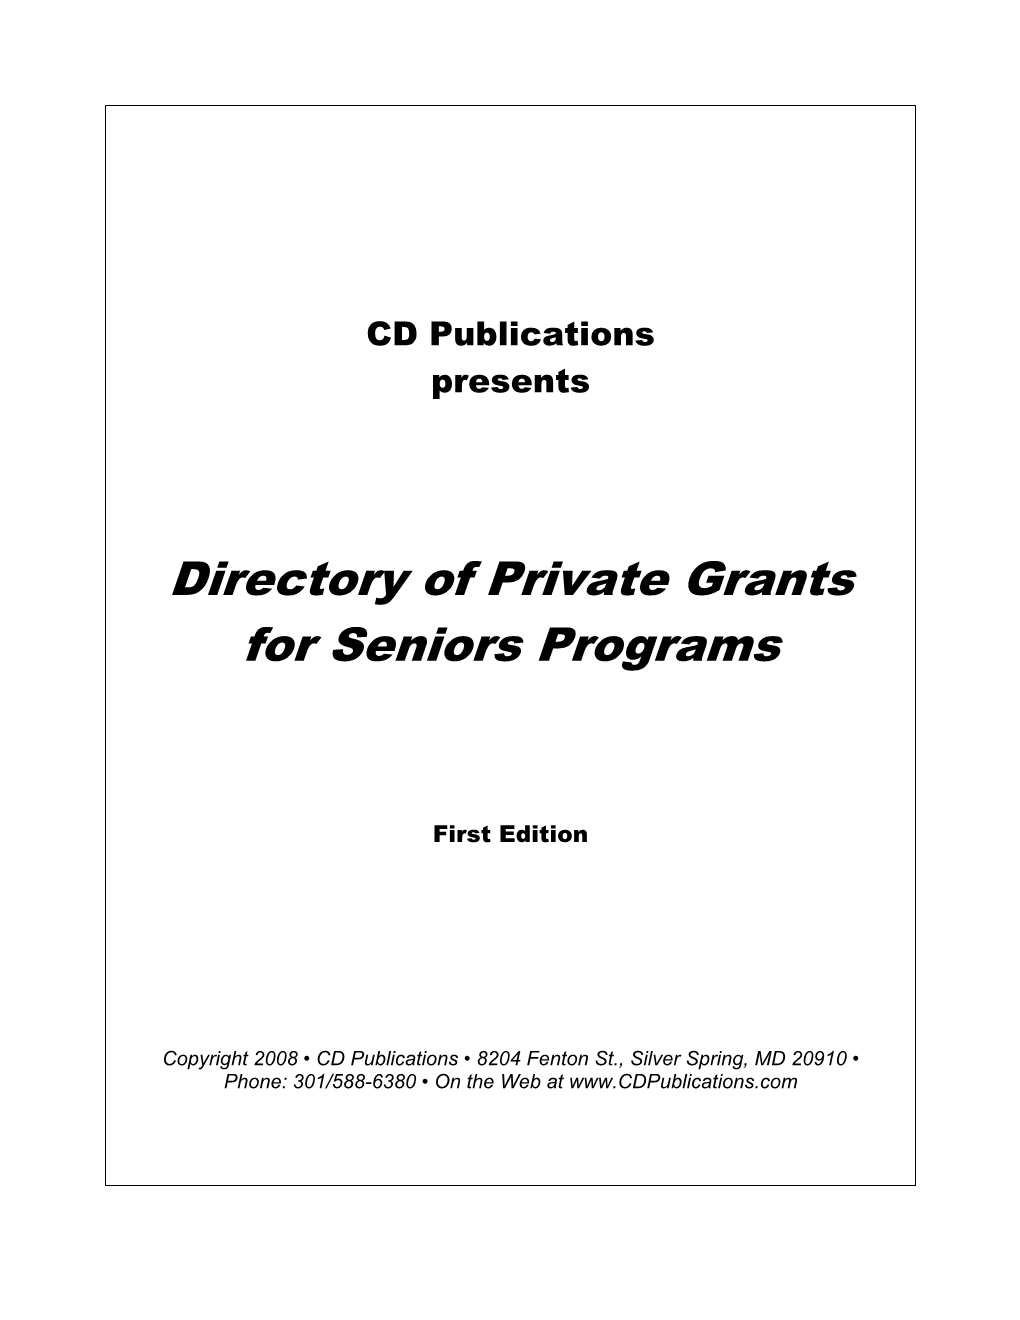 Directory of Private Grants for Seniors Programs